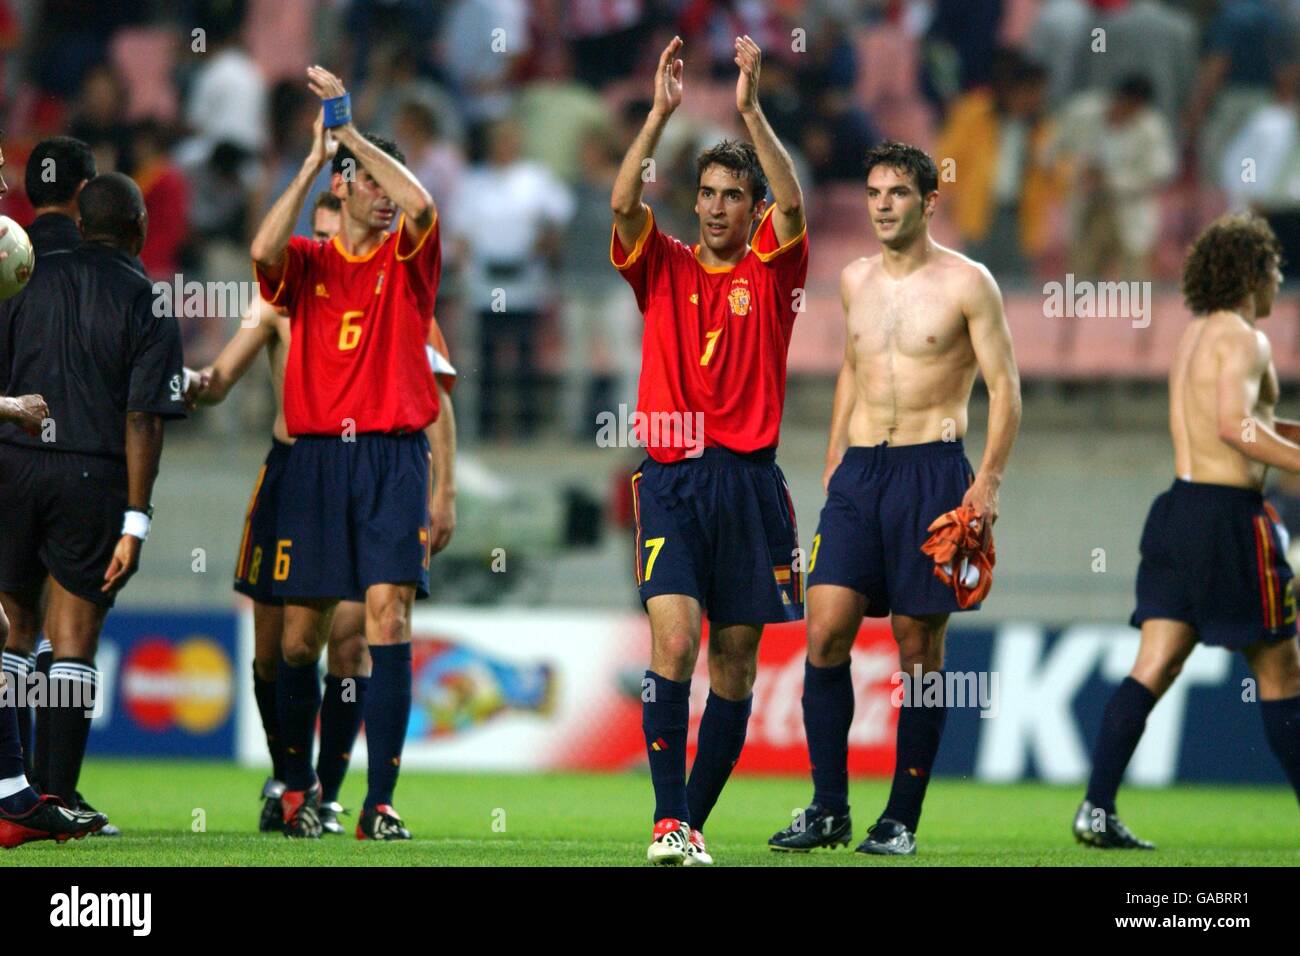 Soccer - FIFA World Cup 2002 - Group B - Spain v Paraguay. Spain's Raul applauds the fans at the end of the game against Paraguay Stock Photo